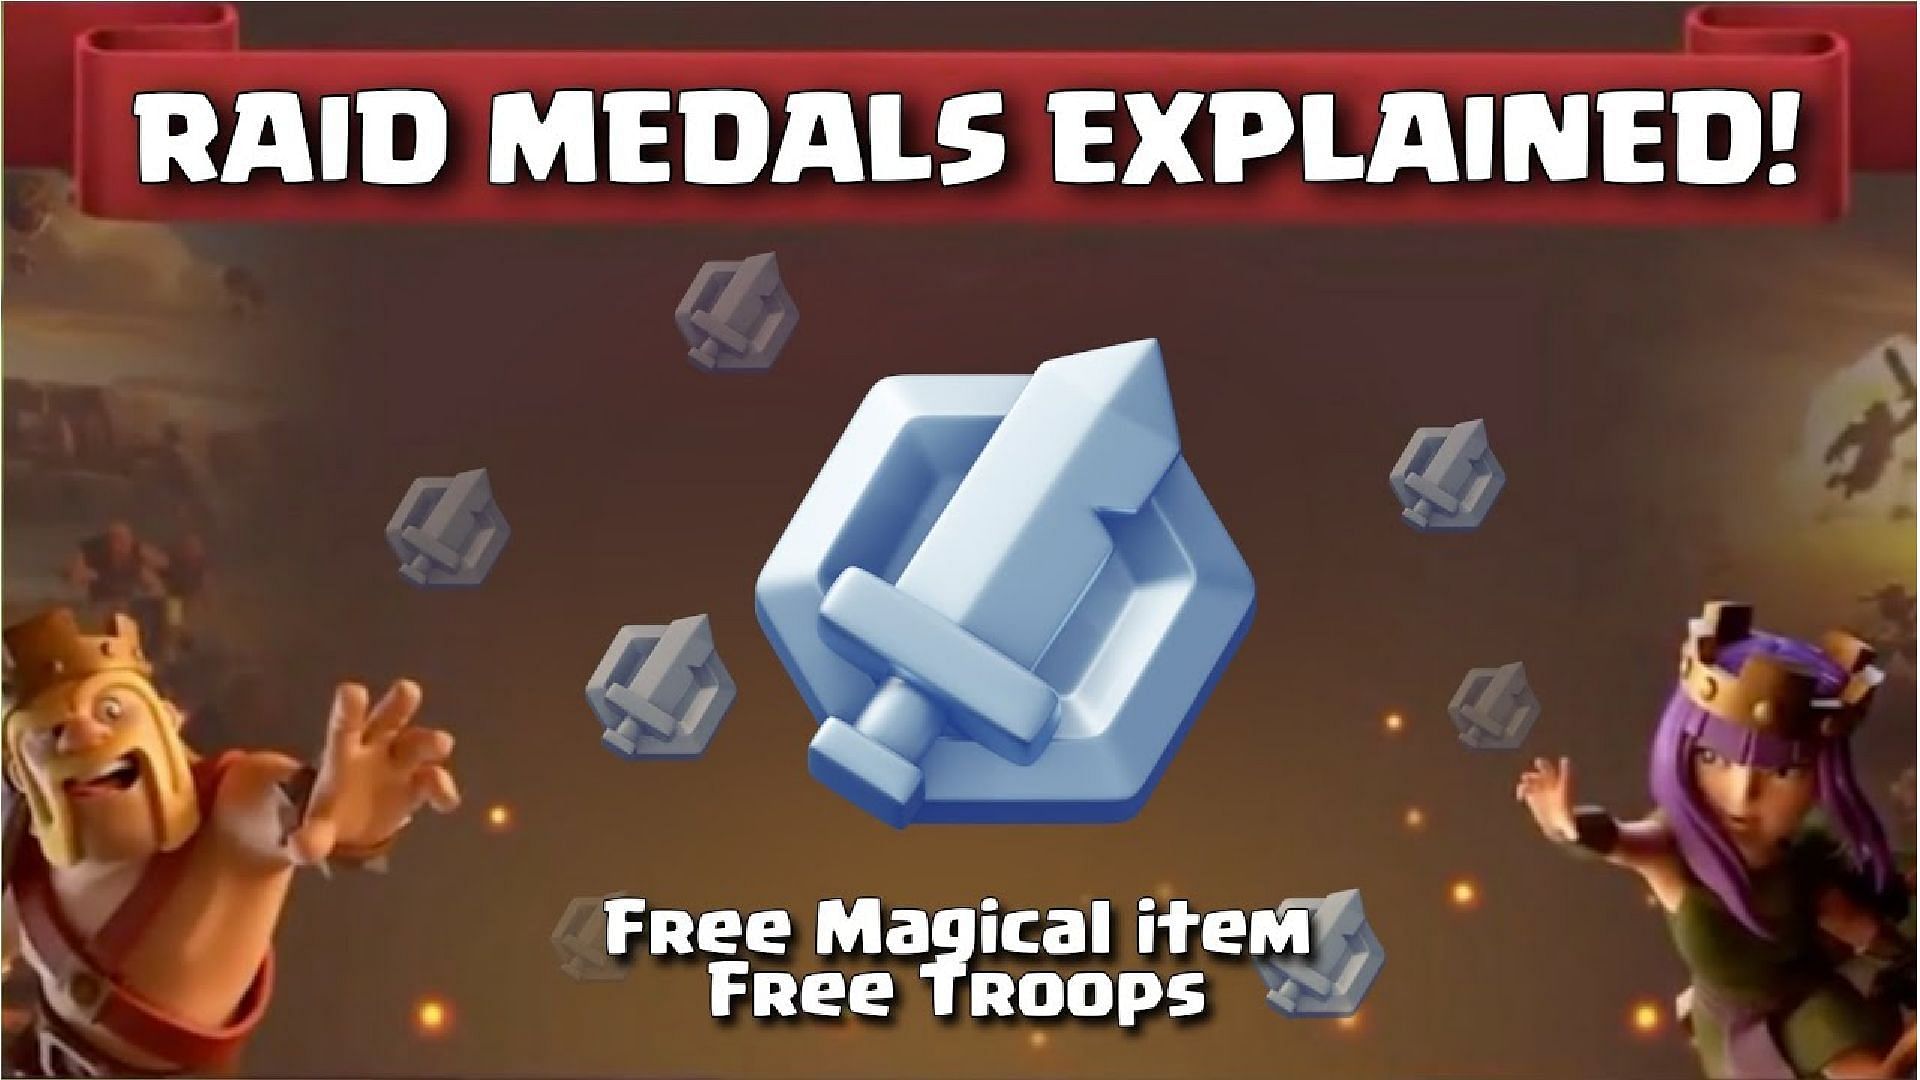 Raid Medals in Clash of Clans